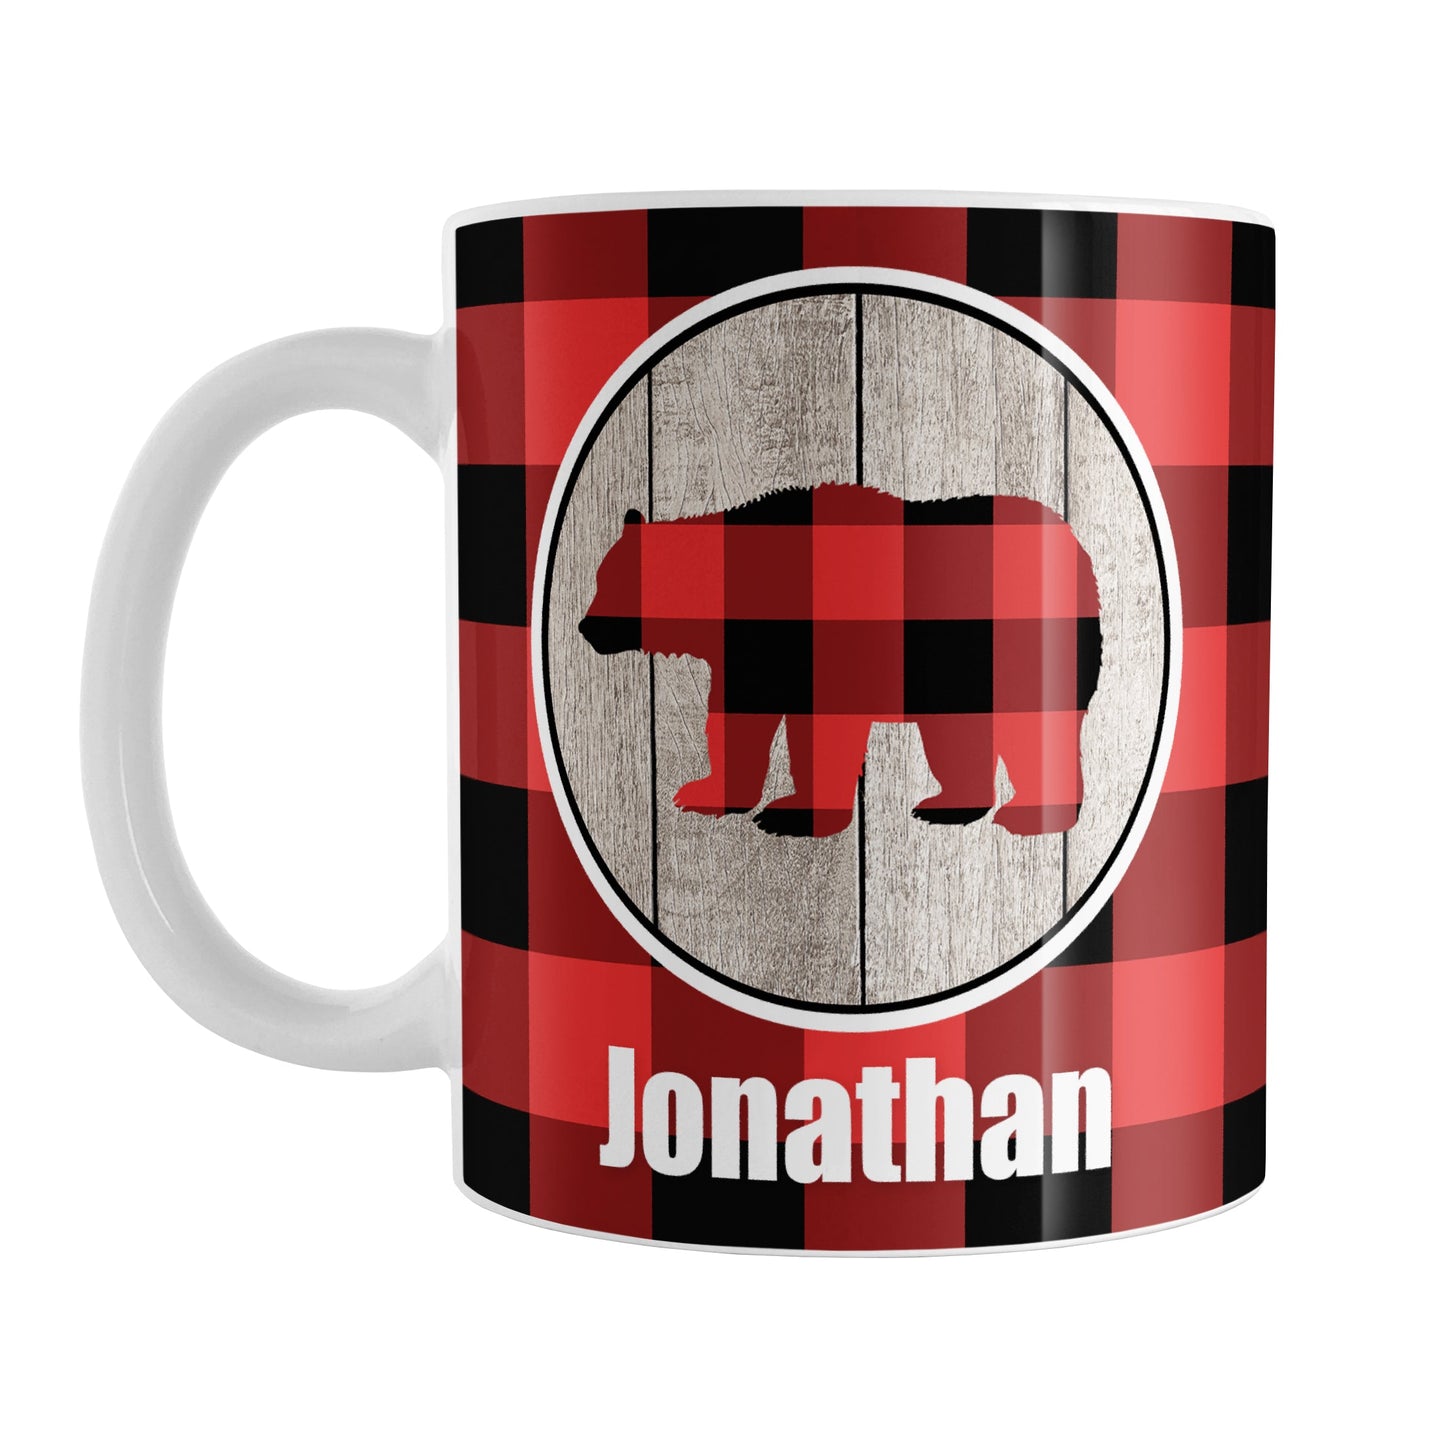 Personalized Rustic Red Buffalo Plaid Bear Mug (11oz) at Amy's Coffee Mugs. A ceramic coffee mug designed with a red and black buffalo plaid bear inside a rustic wood circle on both sides of the mug over a red and black buffalo plaid pattern that wraps around the mug to the handle. Your name is custom printed in white below the bear.